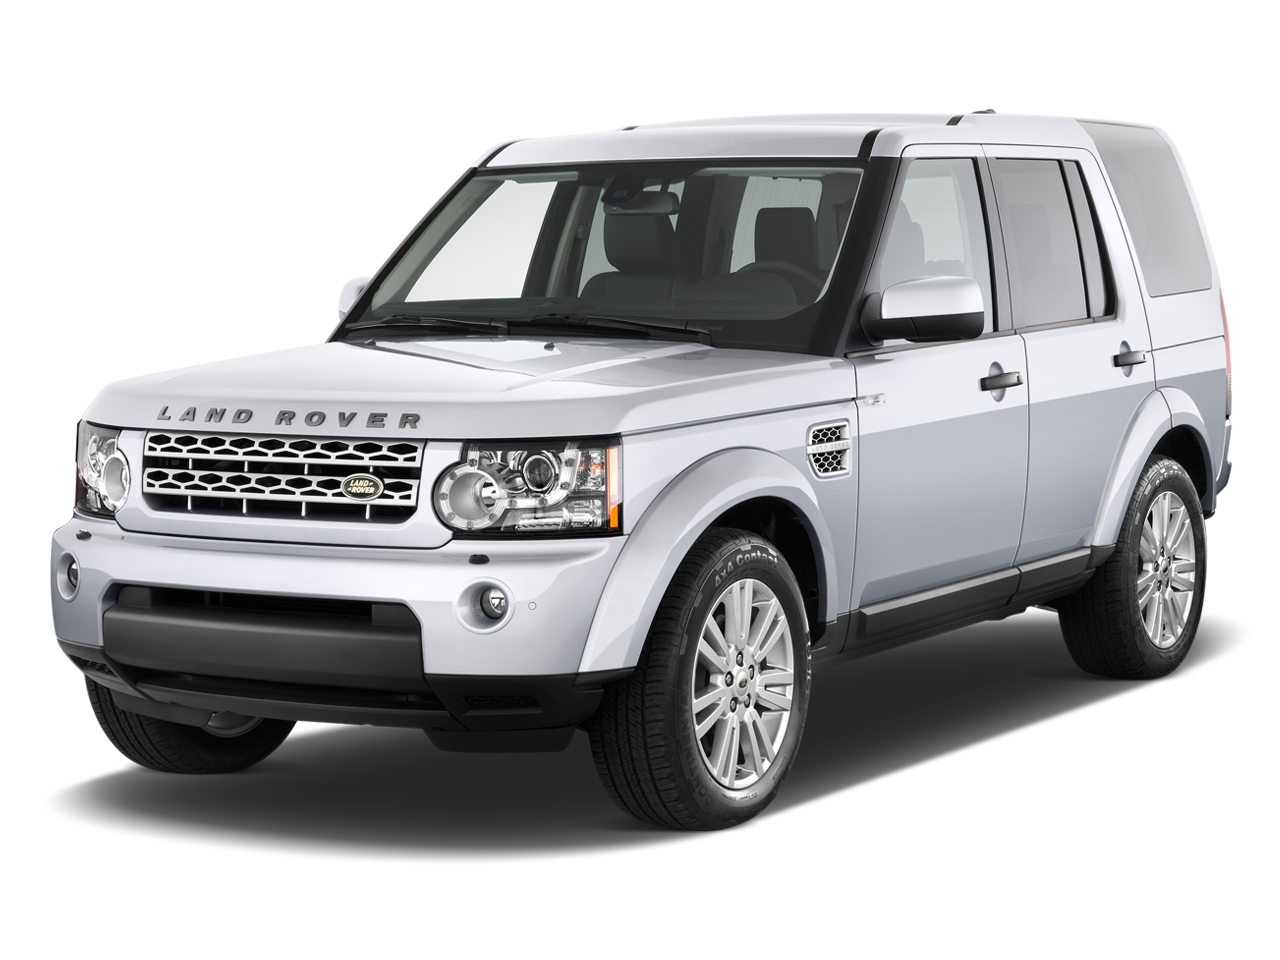 2012 Land Rover Lr4 Review Ratings Specs Prices And